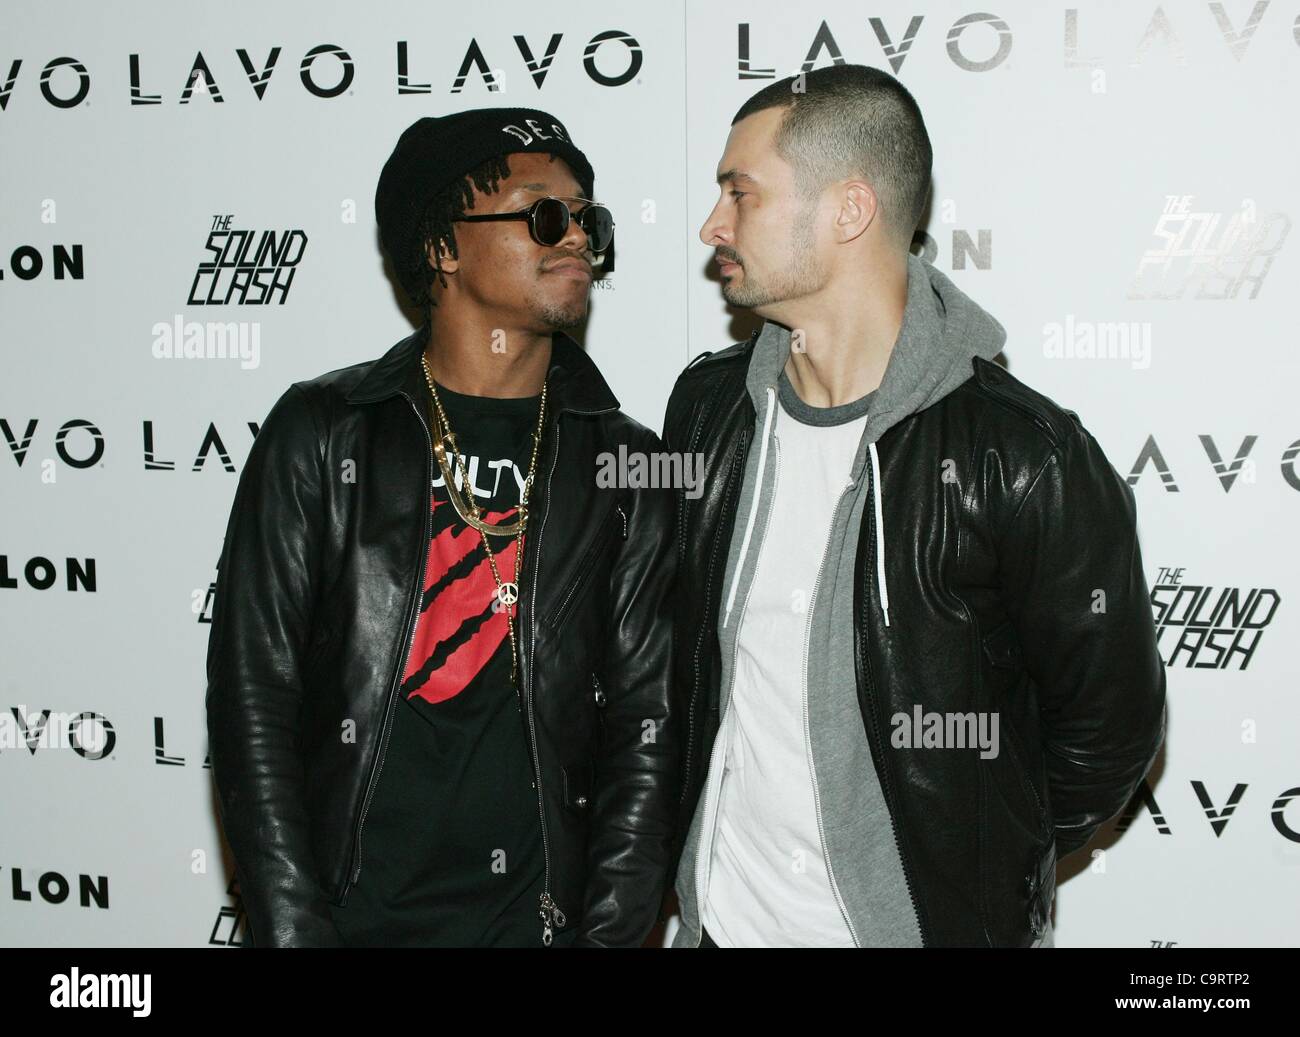 Lupe Fiasco, Sky Gellatly at arrivals for Nylon Magazine Launch Party for The Soundclash's Residency at LAVO, LAVO Restaurant and Nightclub at The Palazzo, Las Vegas, NV February 14, 2012. Photo By: James Atoa/Everett Collection Stock Photo